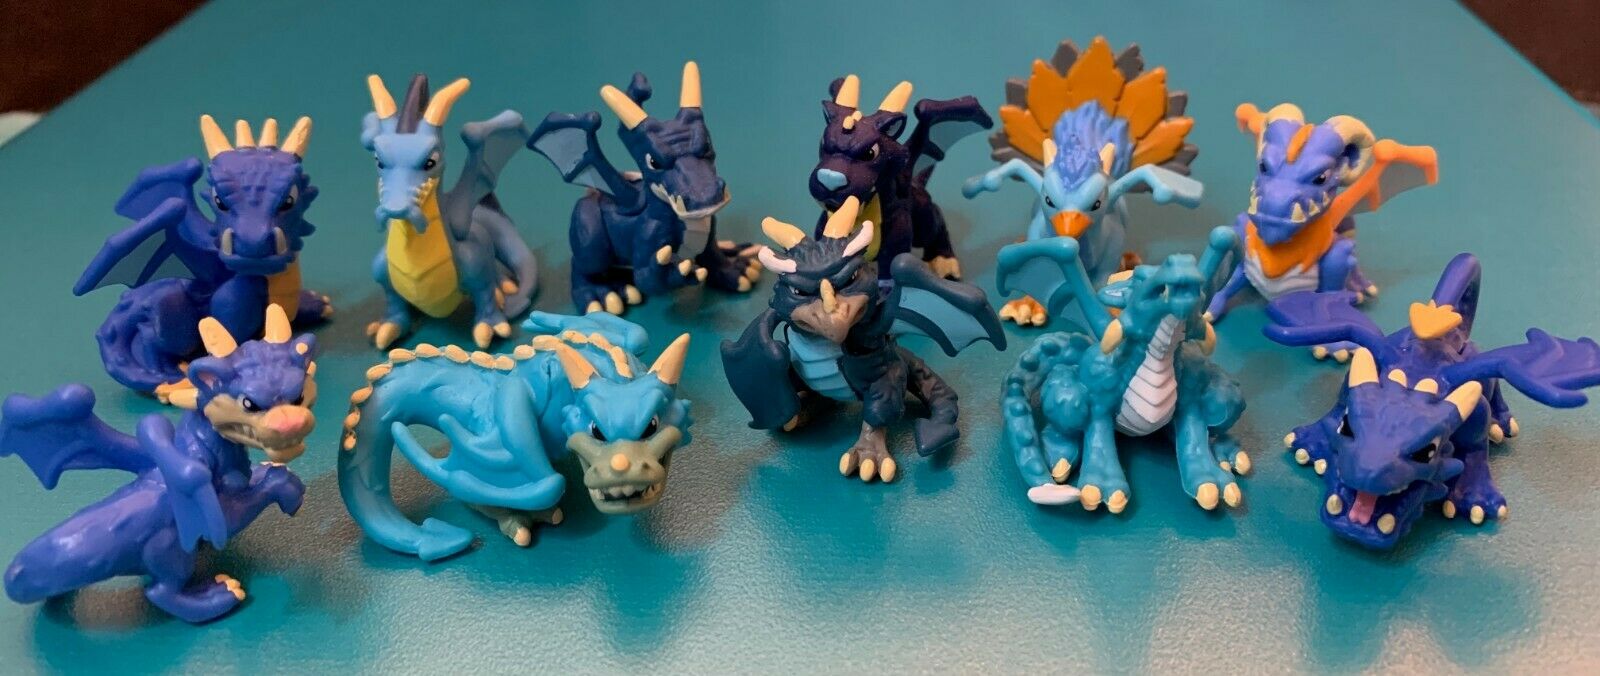 Dragamonz Stormclaw Dragon Figures, Character & Battle Cards, Combined Shipping